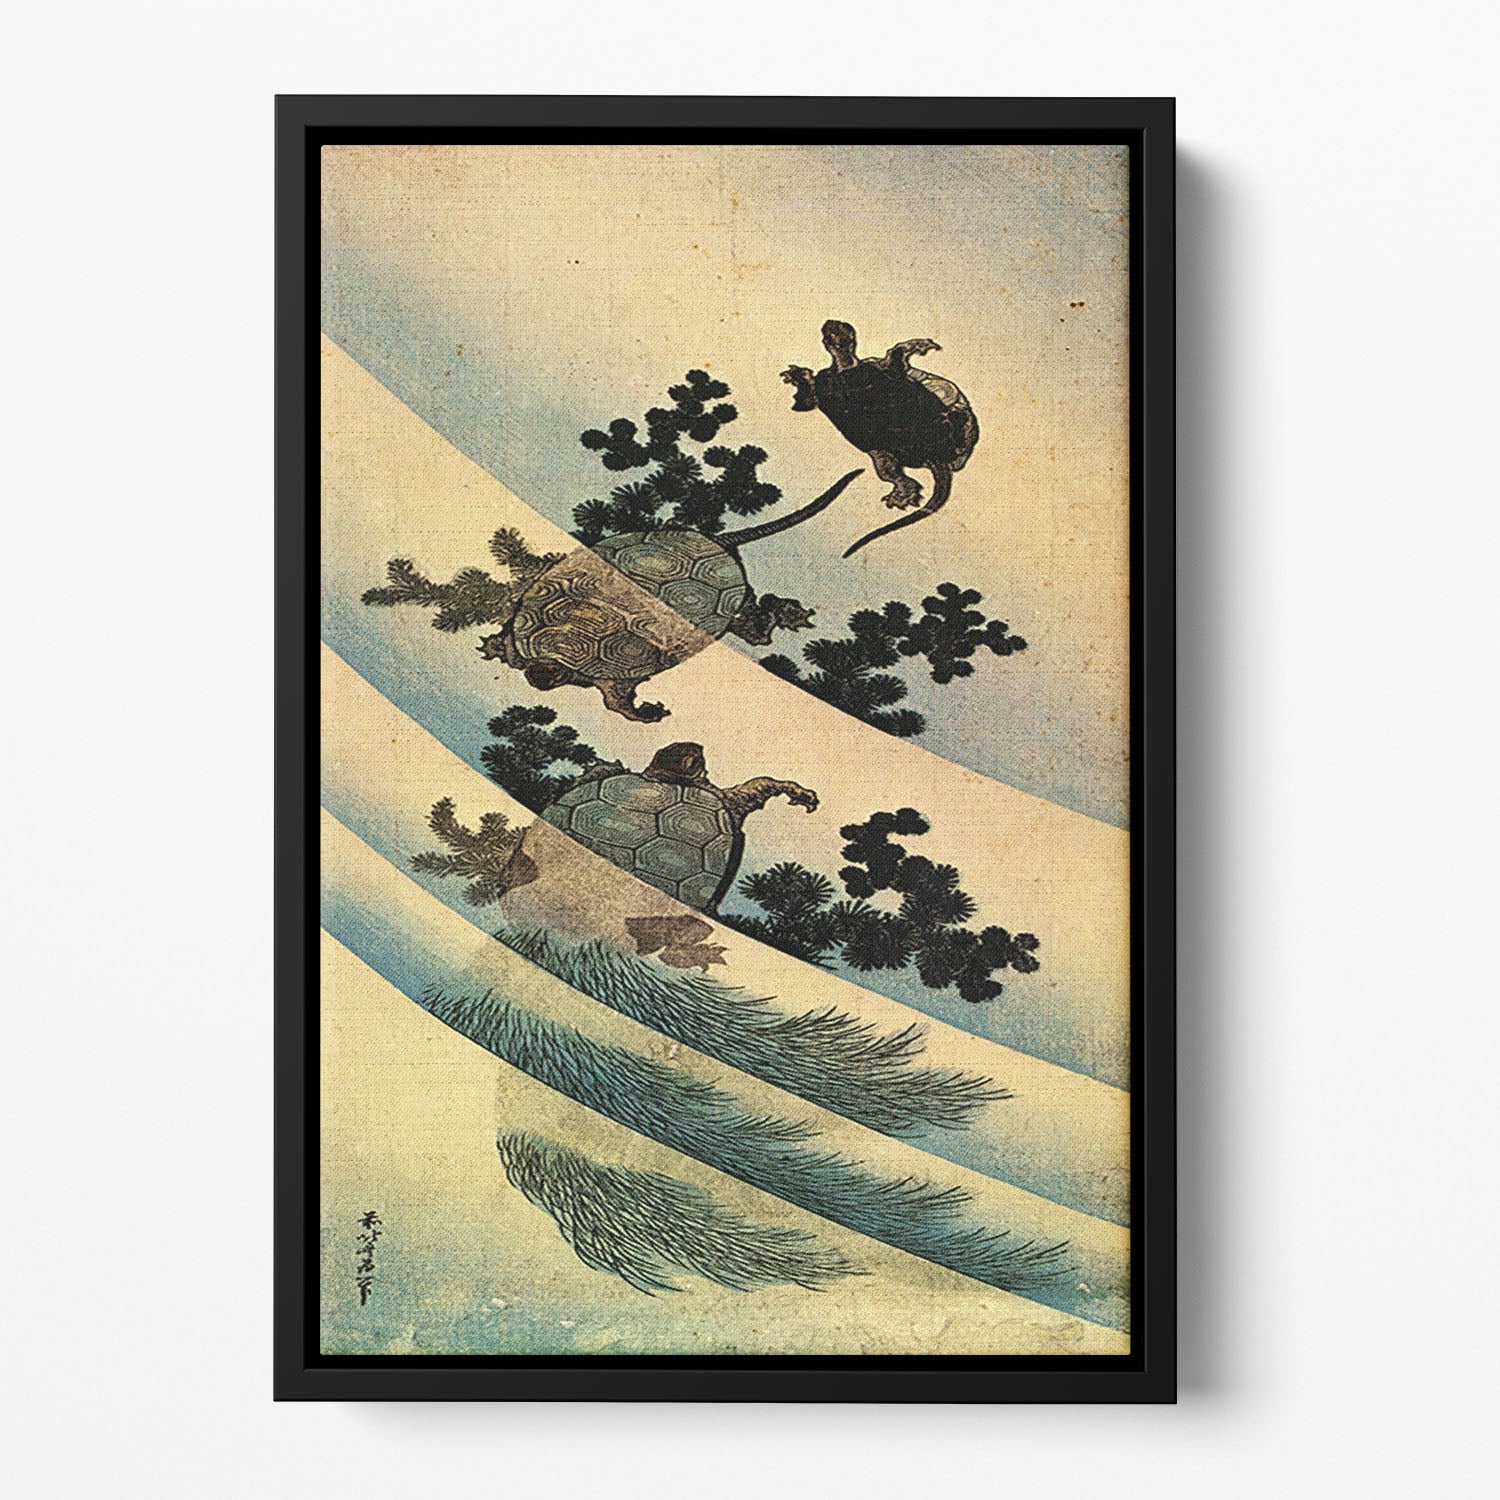 Turtles by Hokusai Floating Framed Canvas